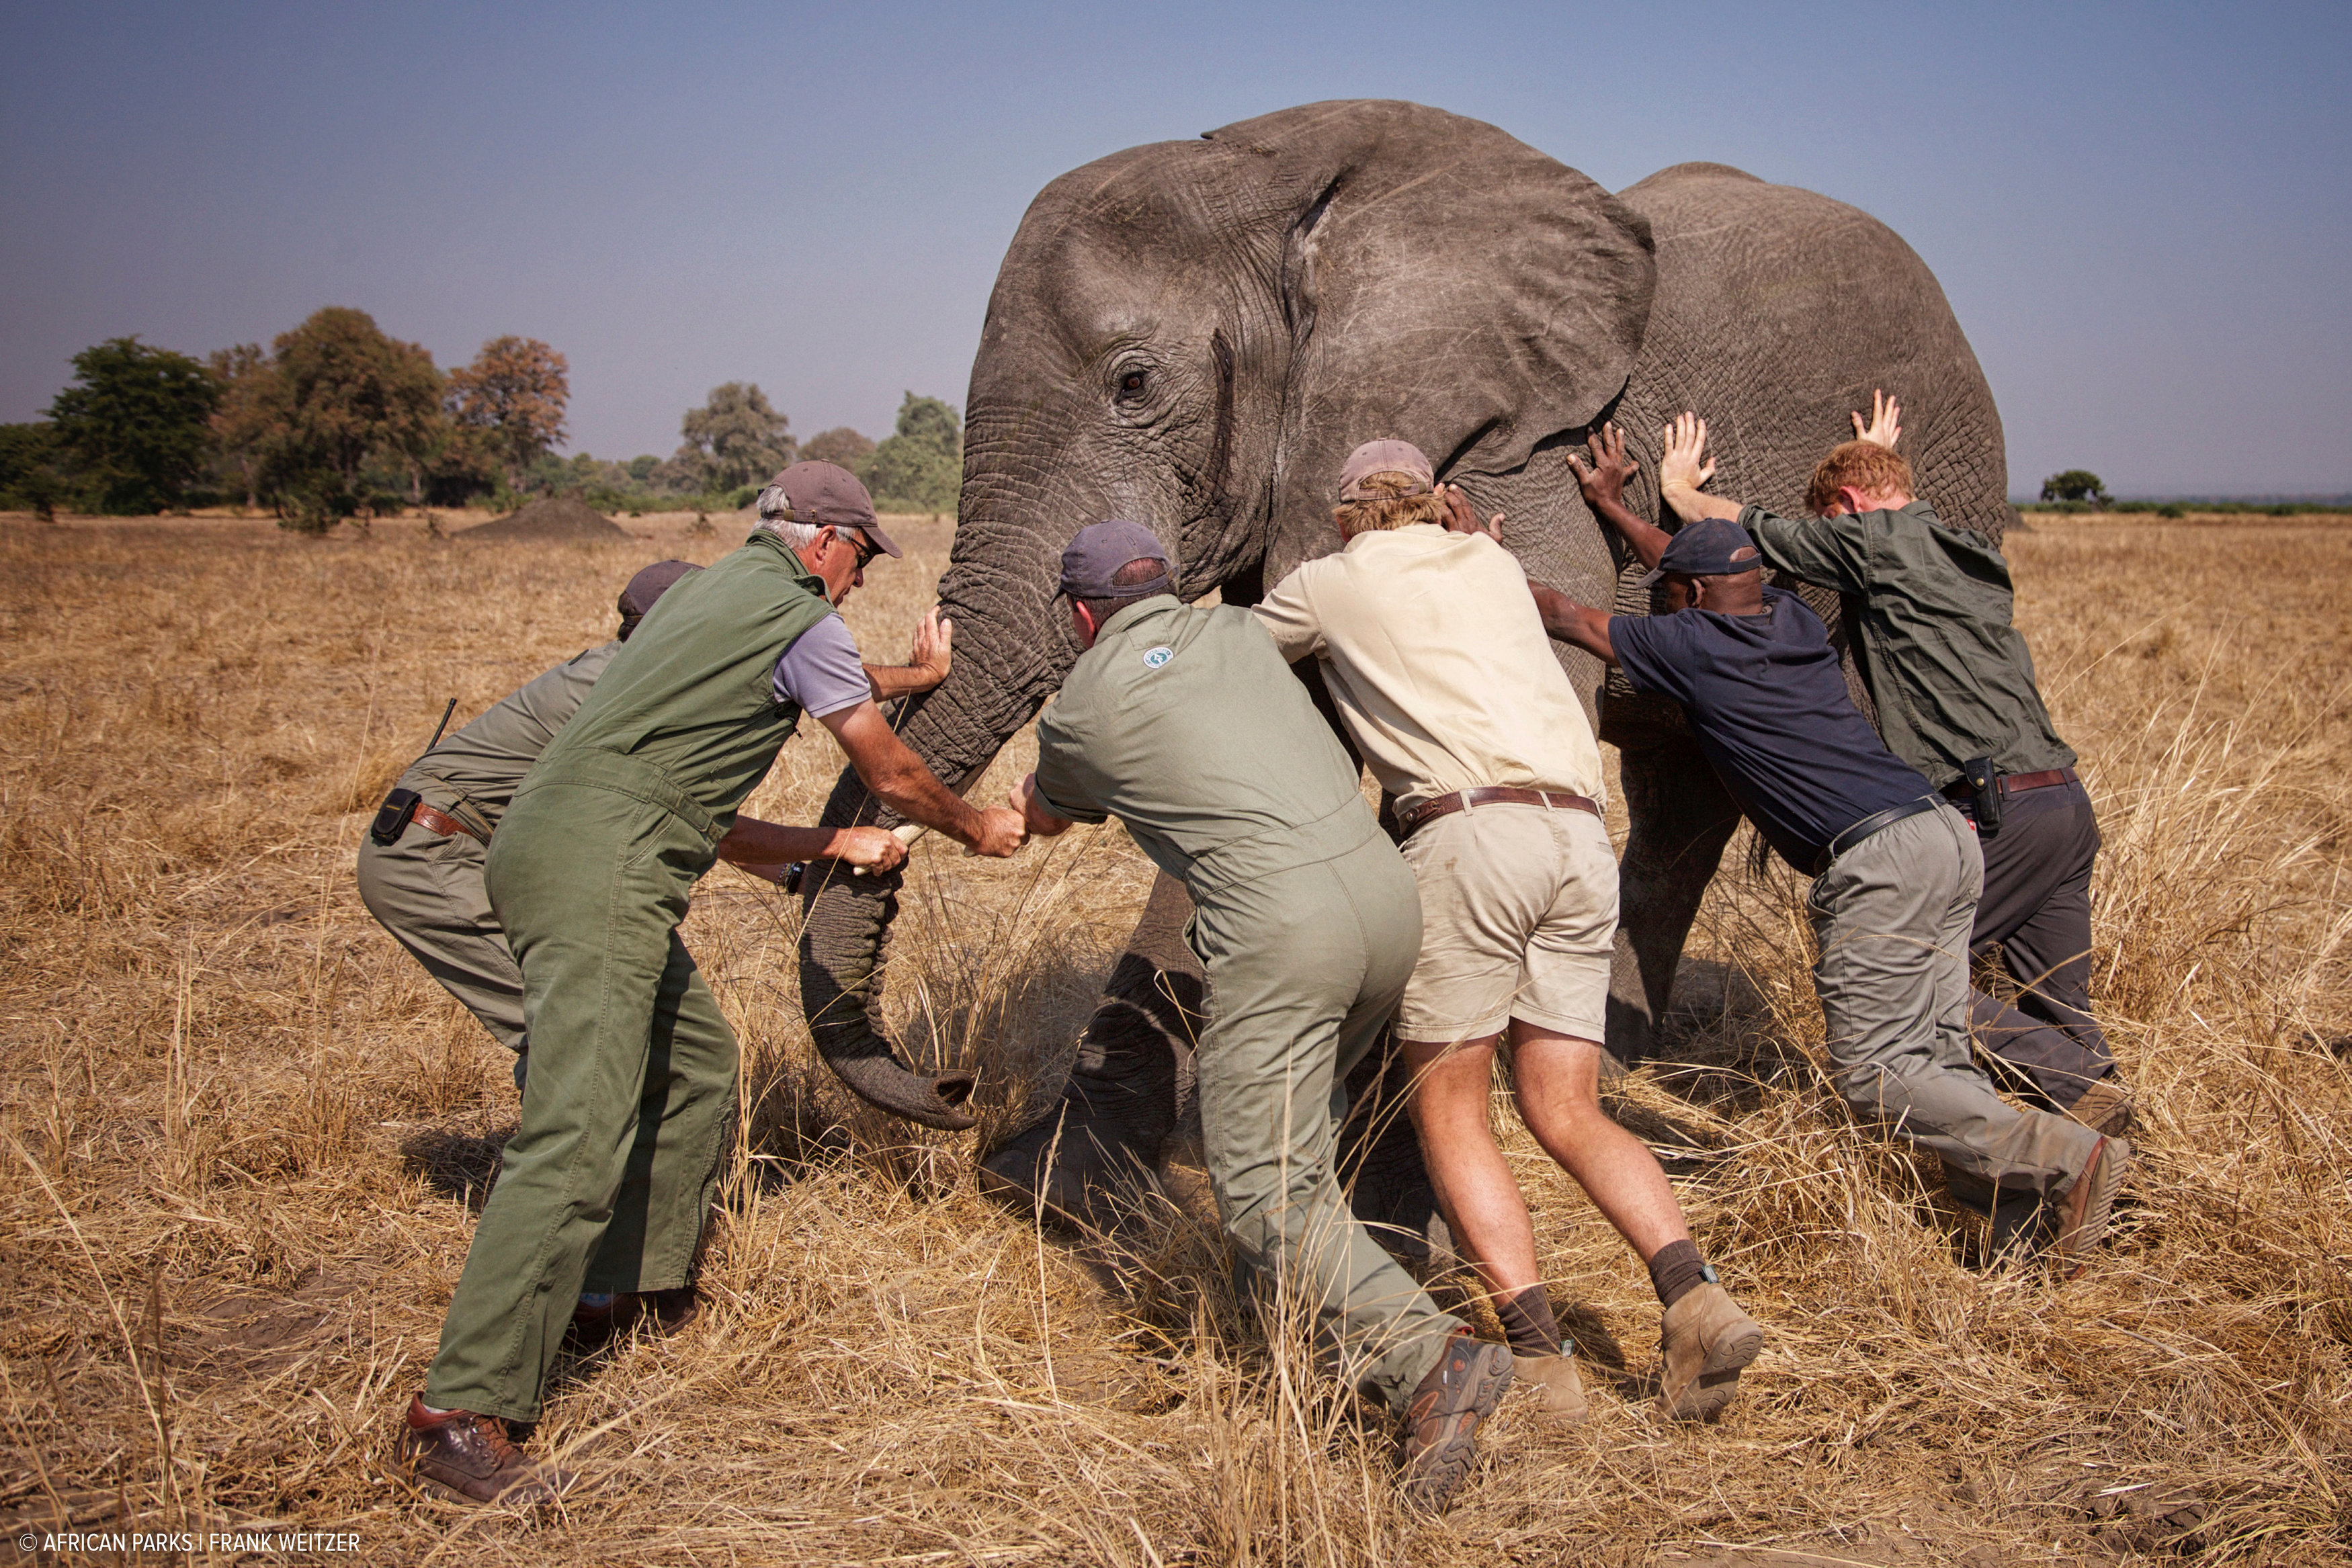 Undated picture of Prince Harry while he worked in Malawi with African Parks as part of an initiative involving moving 500 elephants over 350 kilometres across Malawi from Liwonde National Park and Majete Wildlife Reserve to Nkhotakota Wildlife Reserve, issued by Kensington Palace in London, Britain on October 28, 2016. African Parks/Frank Weitzer/Handout via REUTERS NO COMMERCIAL OR BOOK SALES. FOR EDITORIAL USE ONLY. NO RESALES. NO ARCHIVES